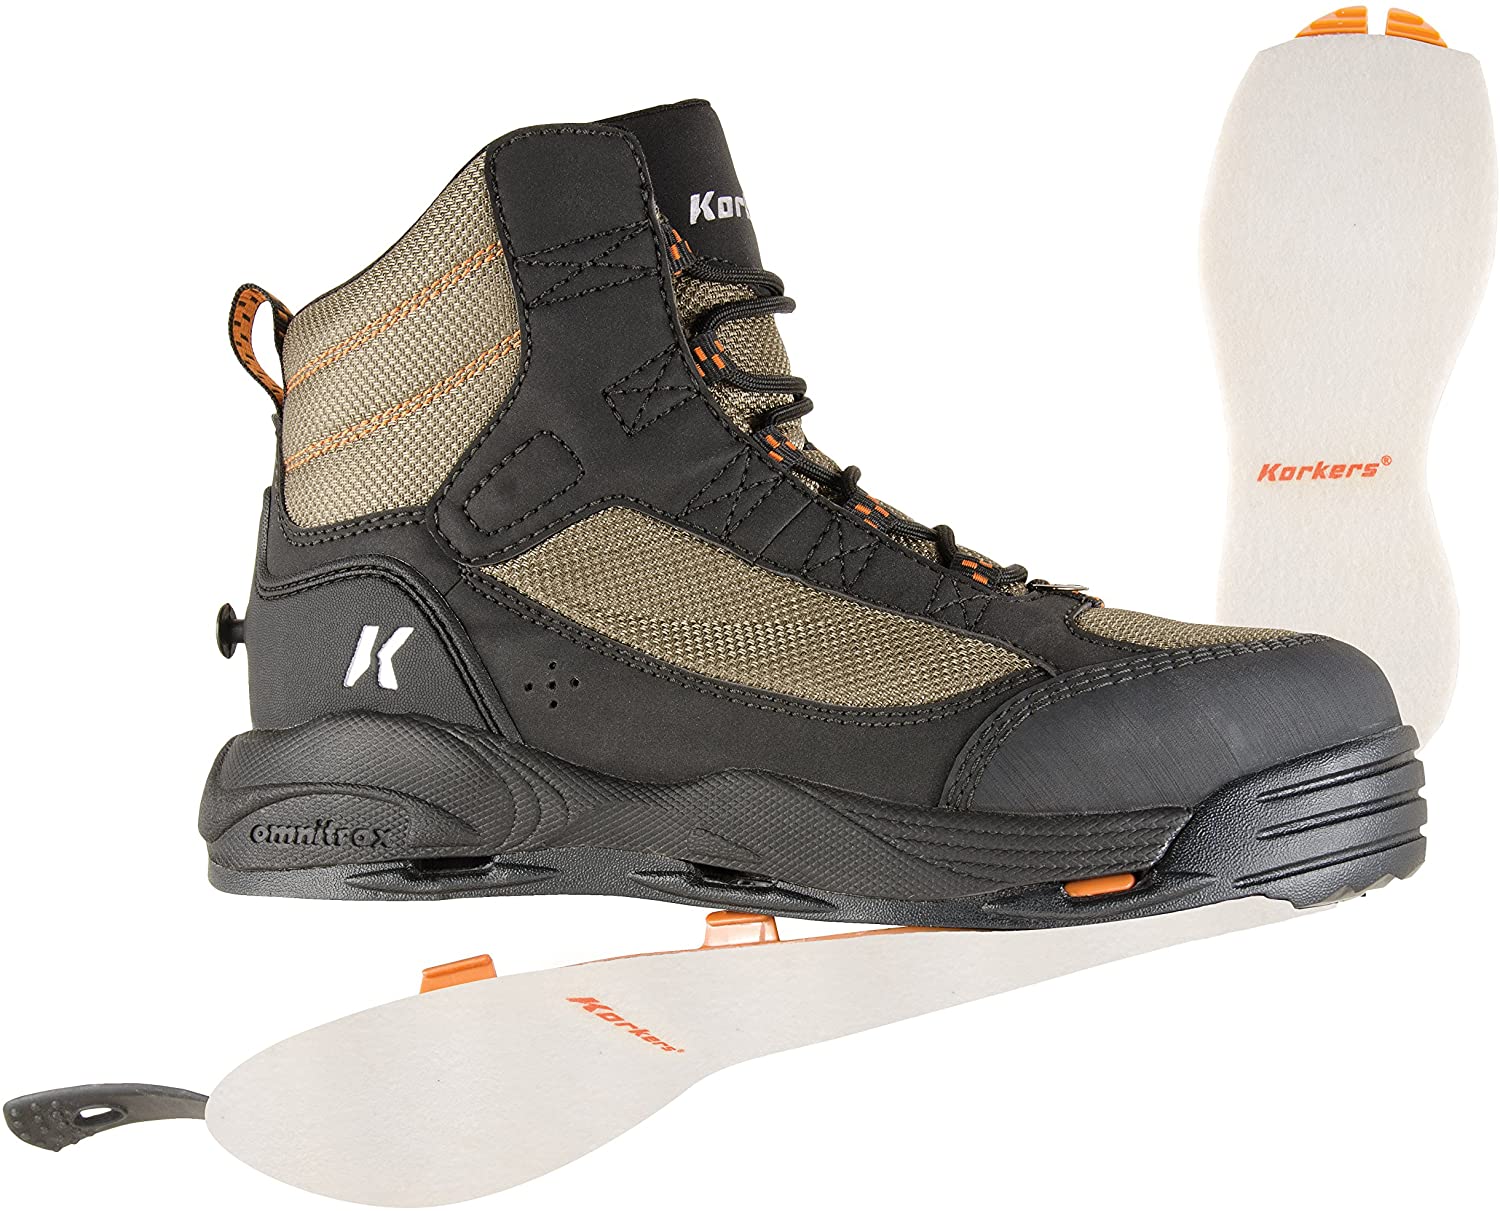 Korkers Greenback Wading Boot - Size 14